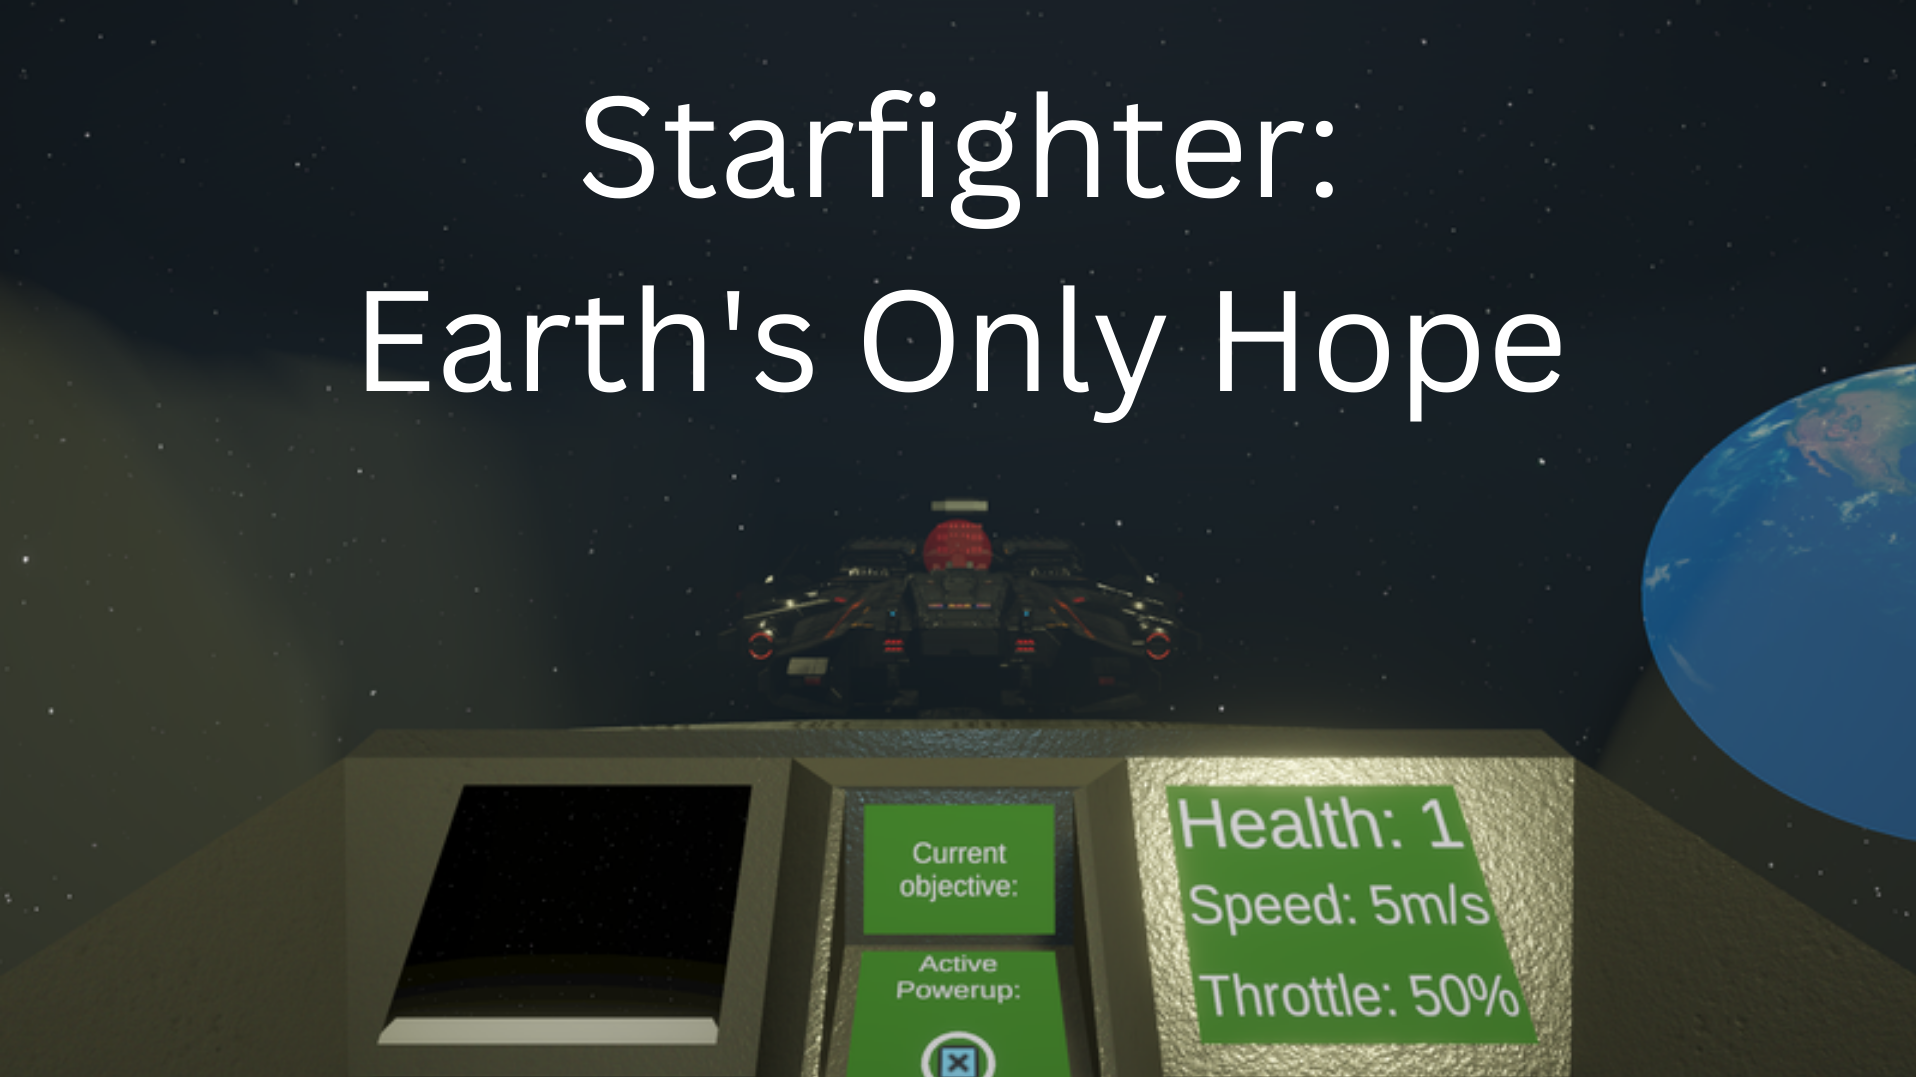 Starfighter: Earth's Only Hope